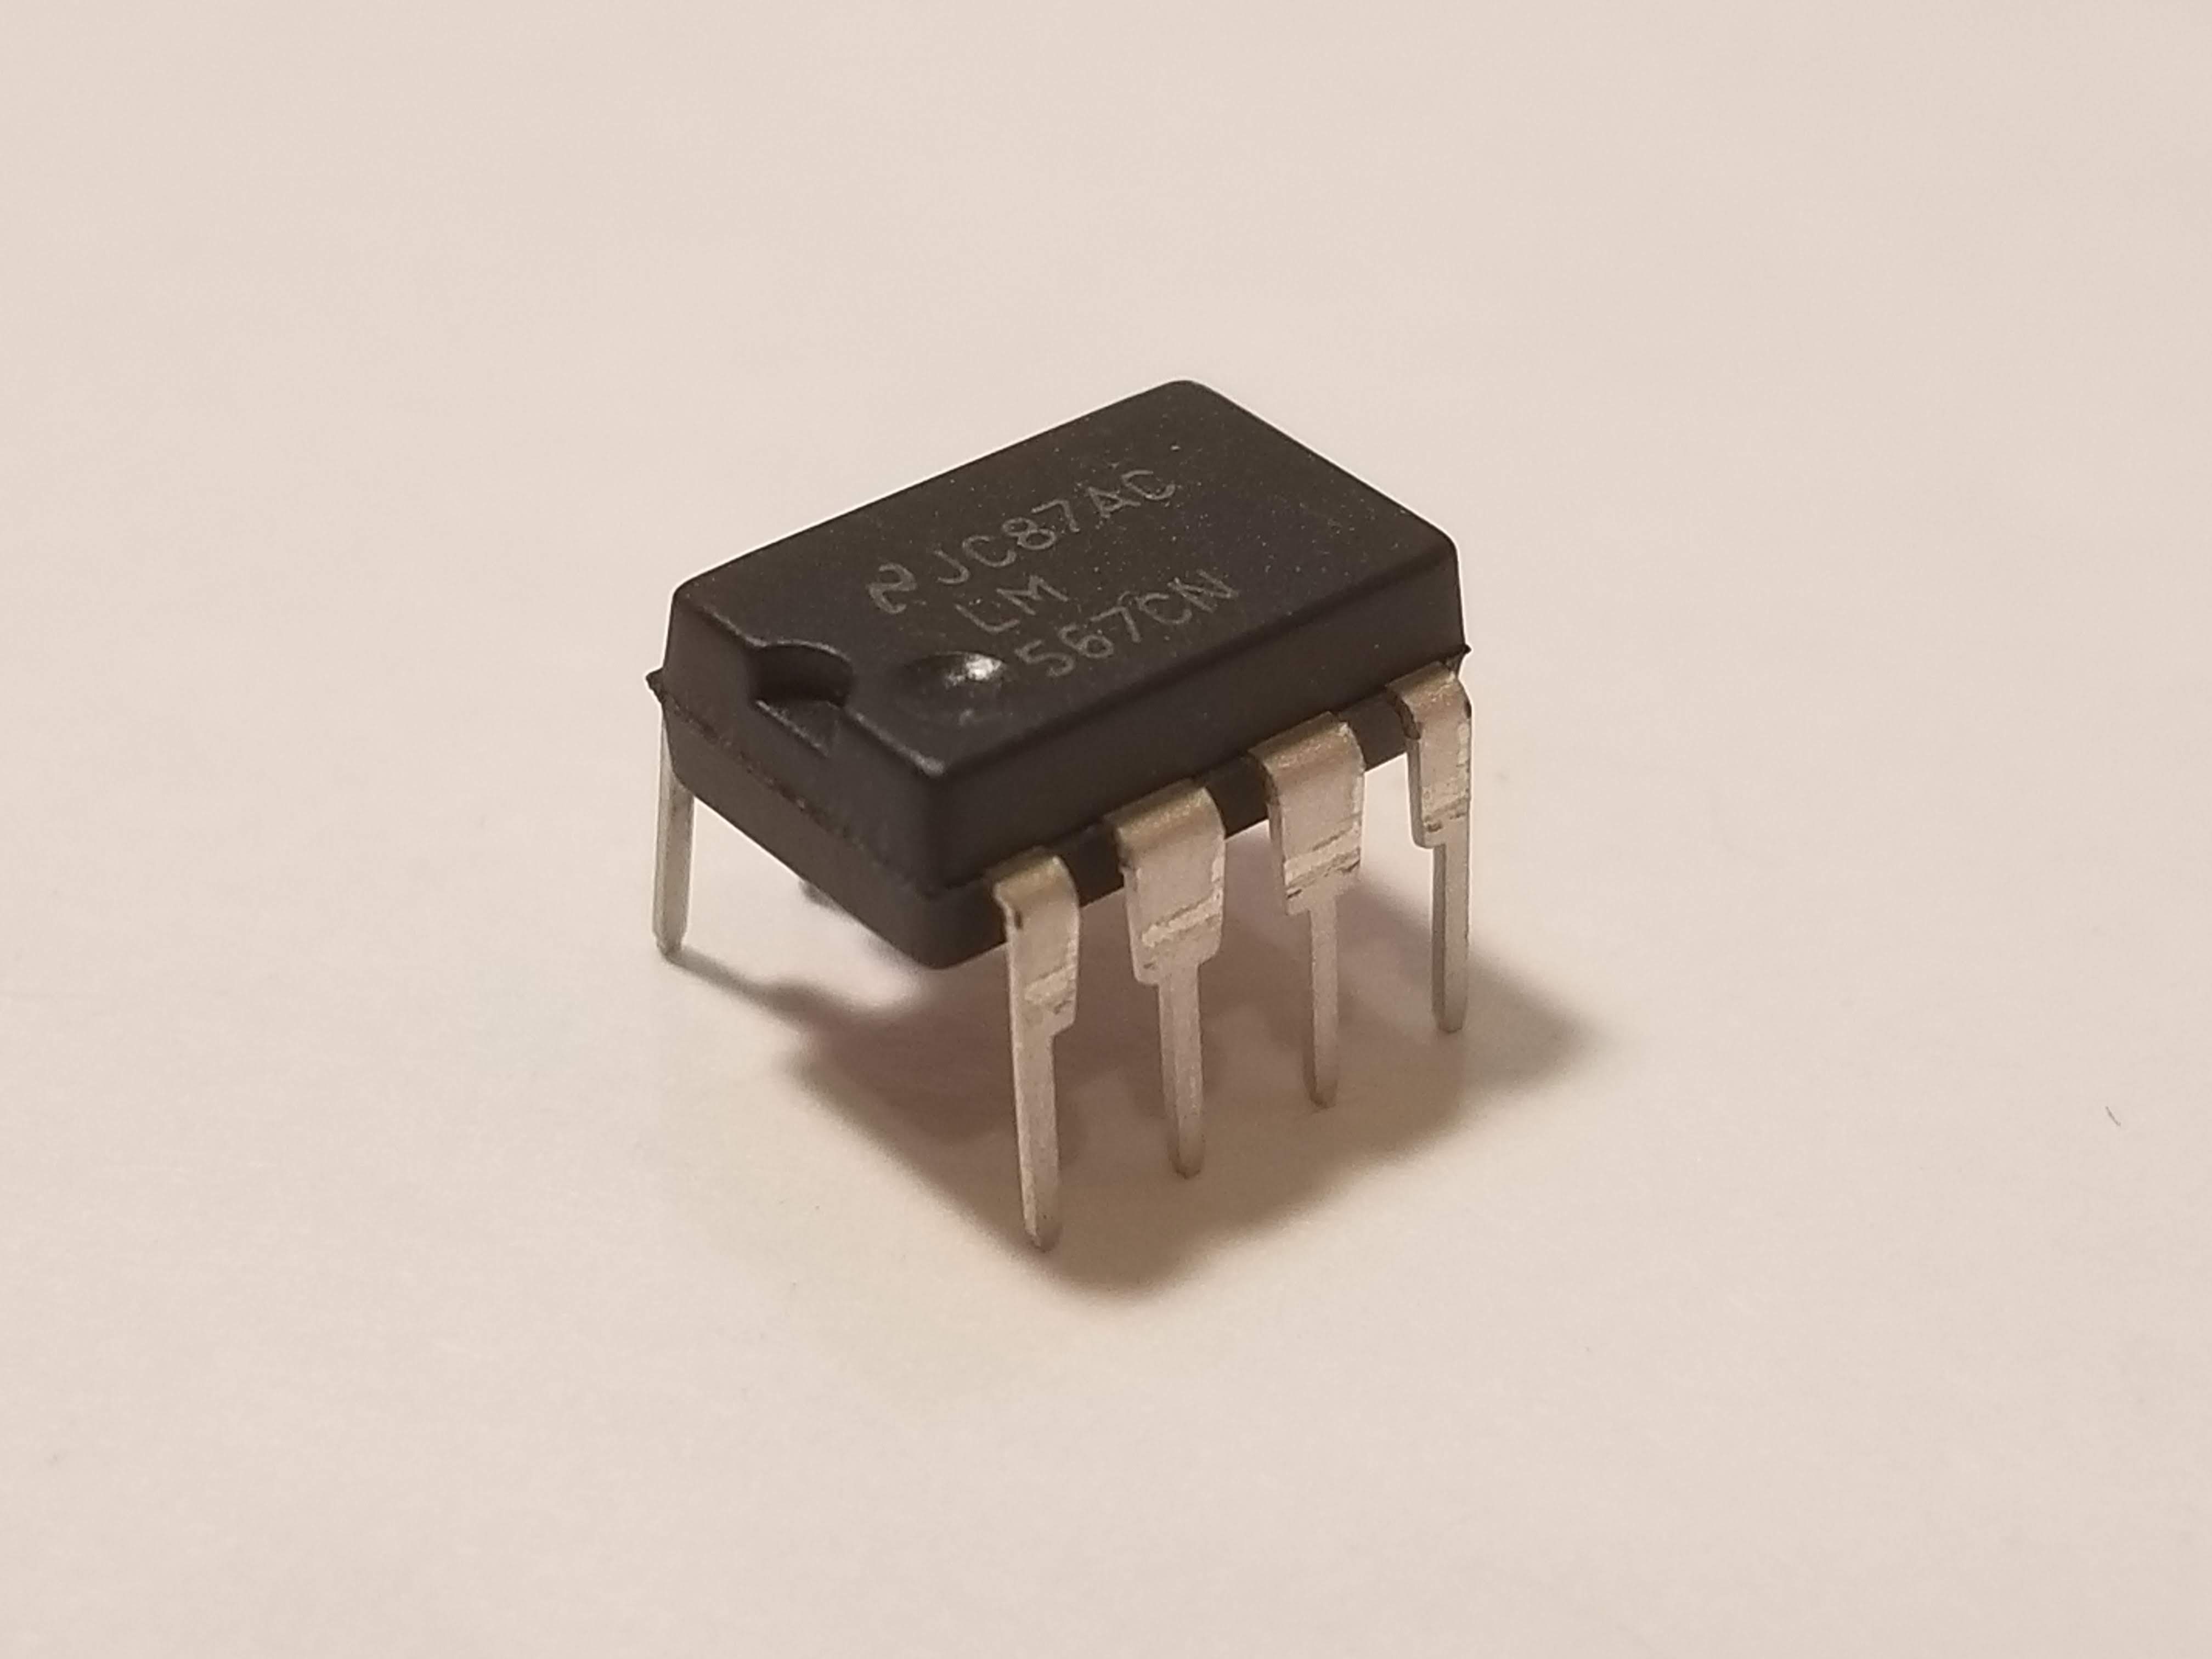 Picture of LM741 Op-Amp